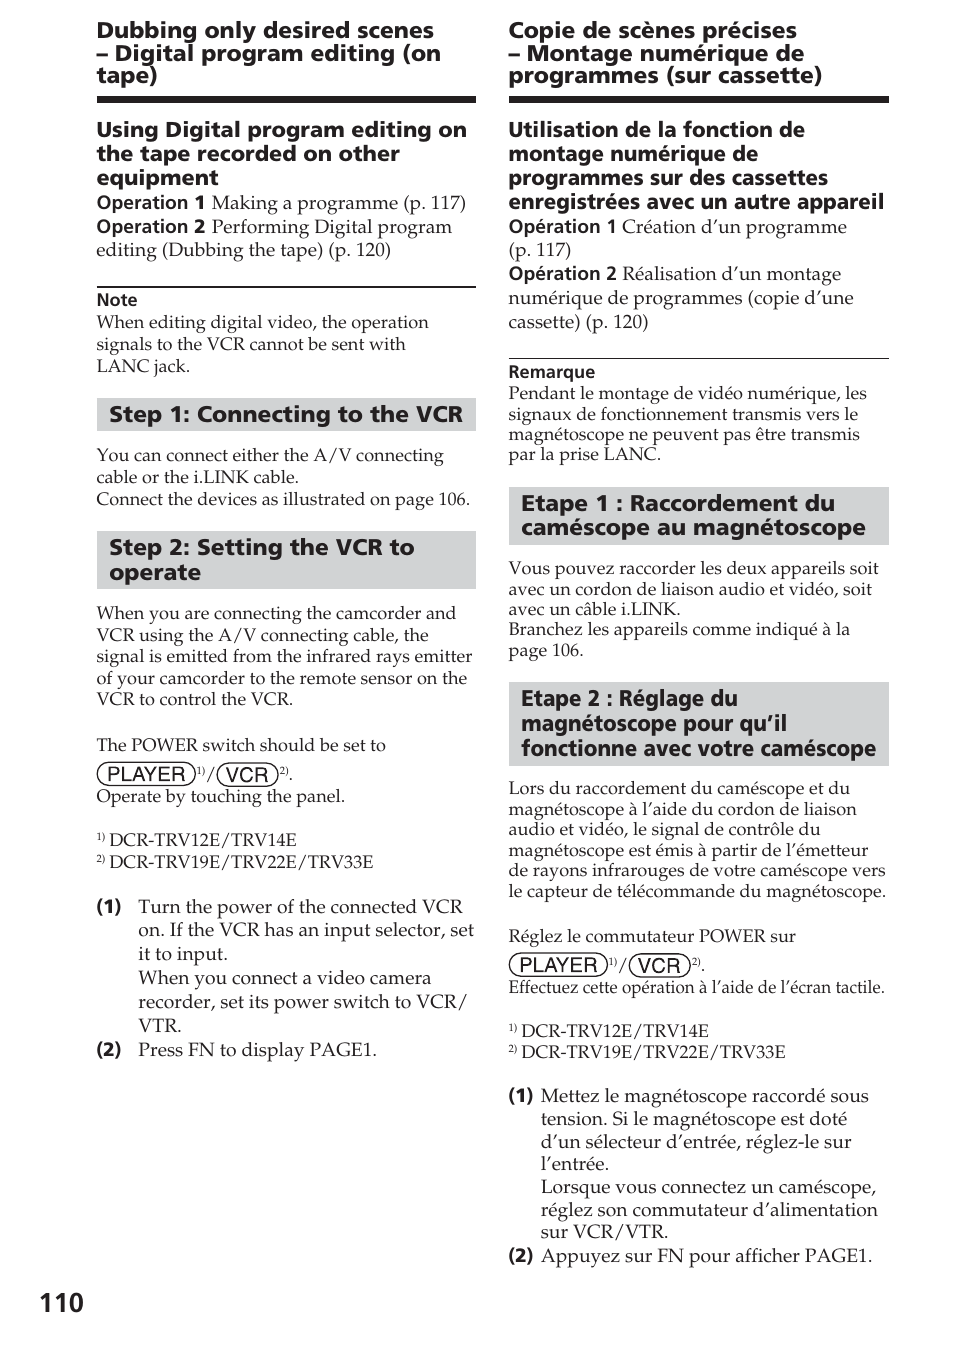 Step 1: connecting to the vcr, Step 2: setting the vcr to operate | Sony DCR-TRV22E Manuel d'utilisation | Page 110 / 320